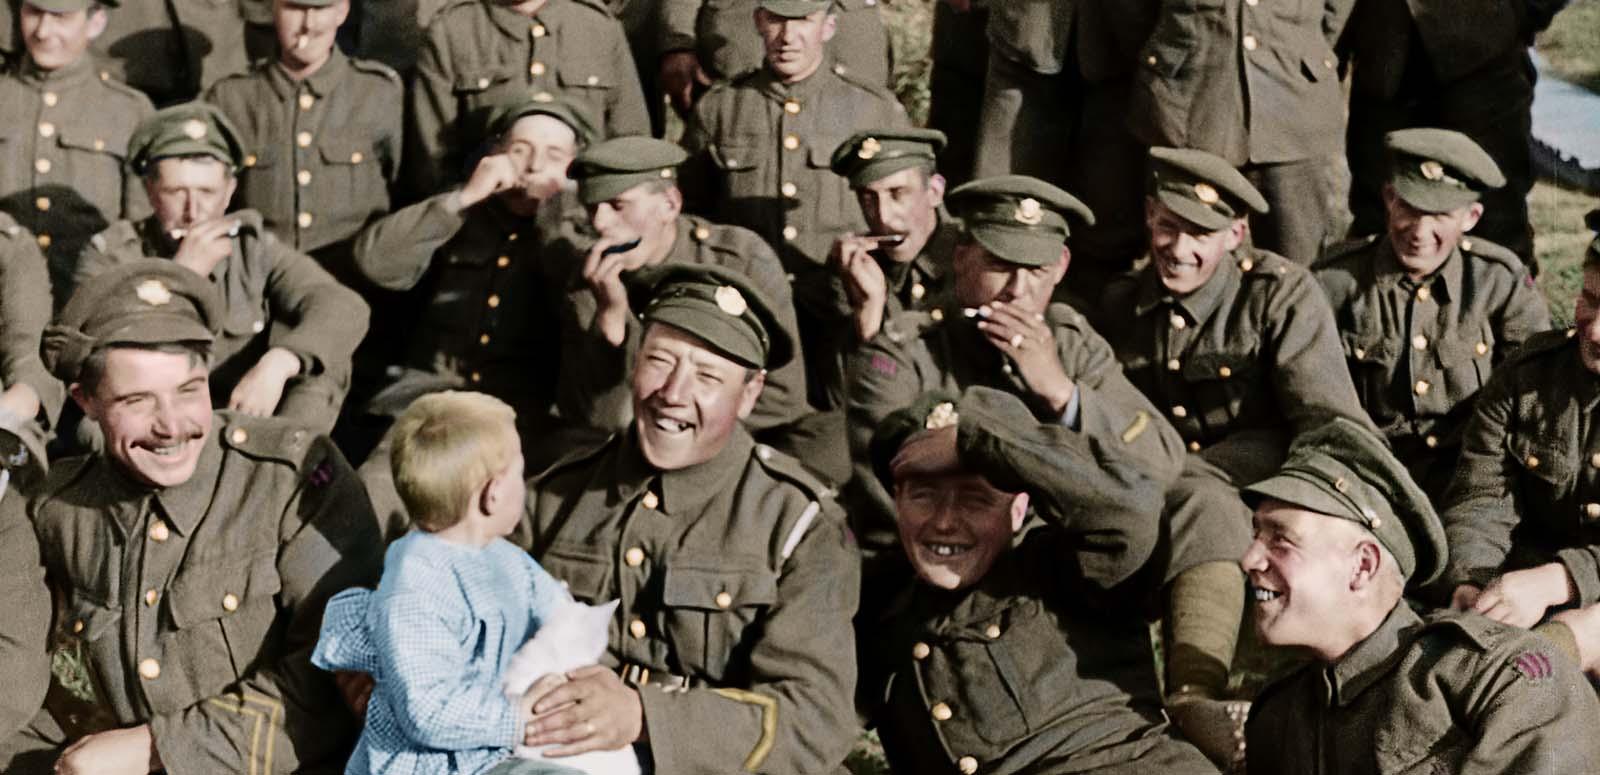 Three rows of British soldiers in uniform relaxing on the grass. One at the front is smiling and holding a small child.